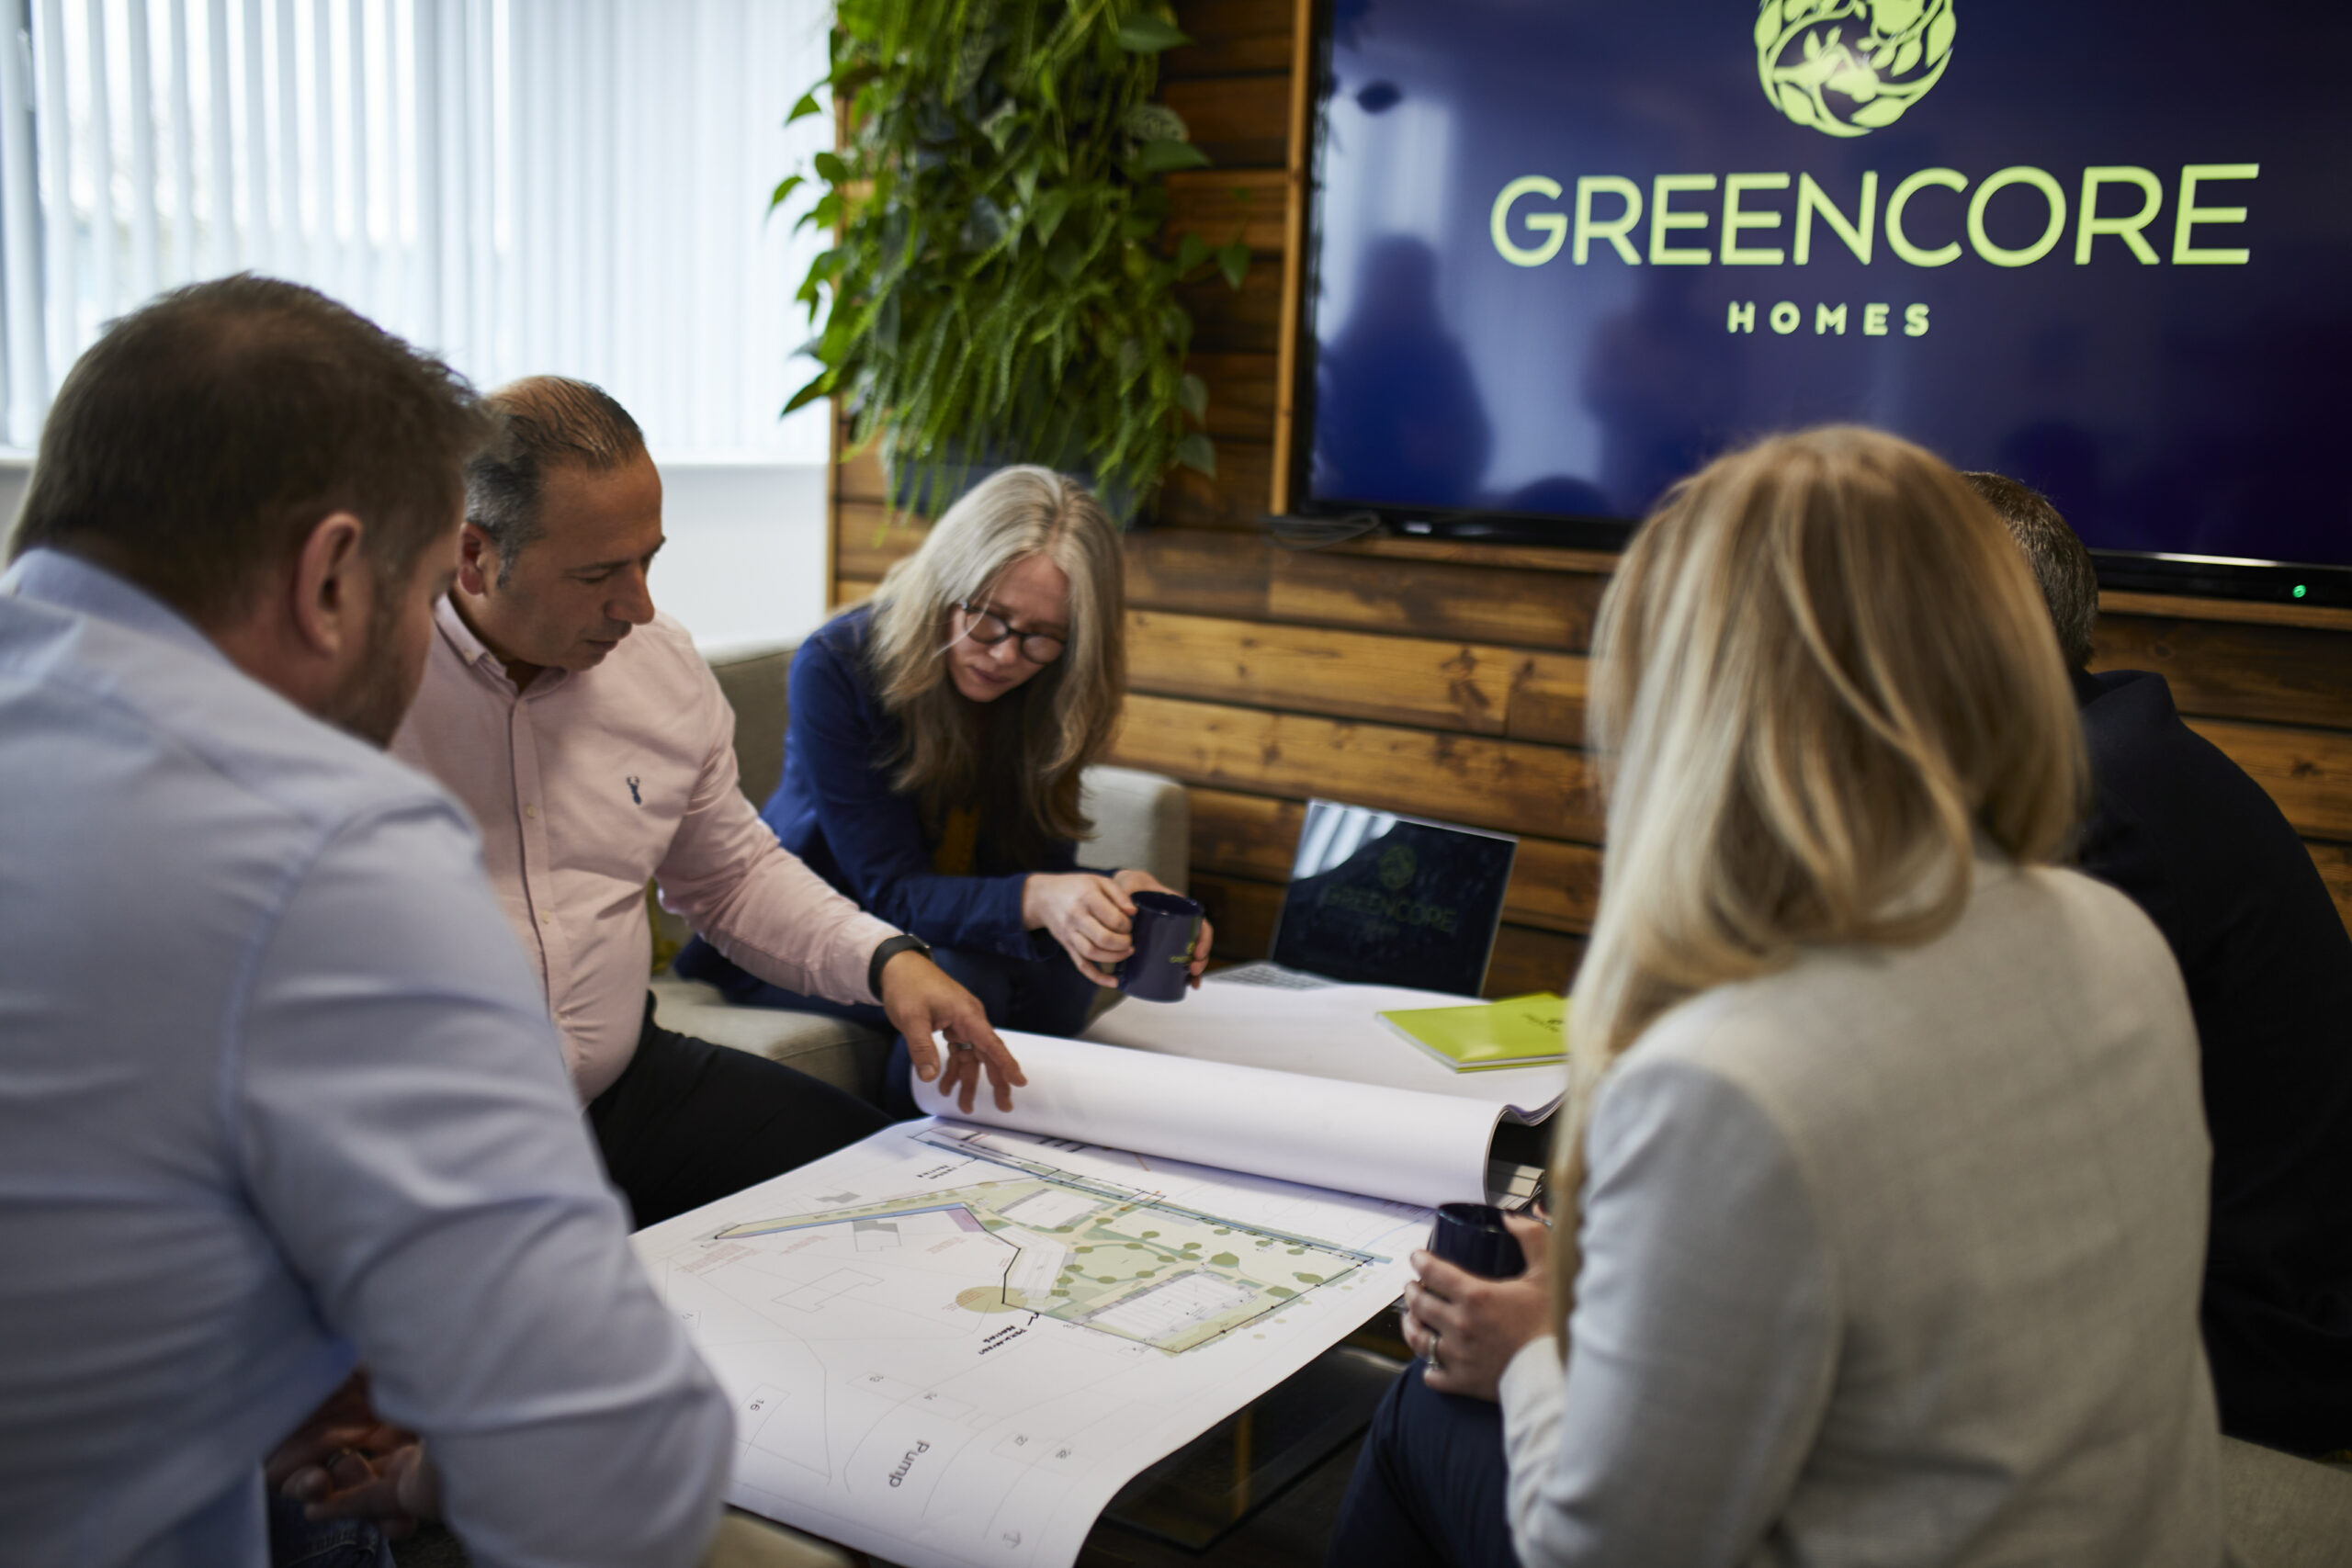 Greencore homes, construction, group meeting, team, carbon zero, sustainable, eco, building